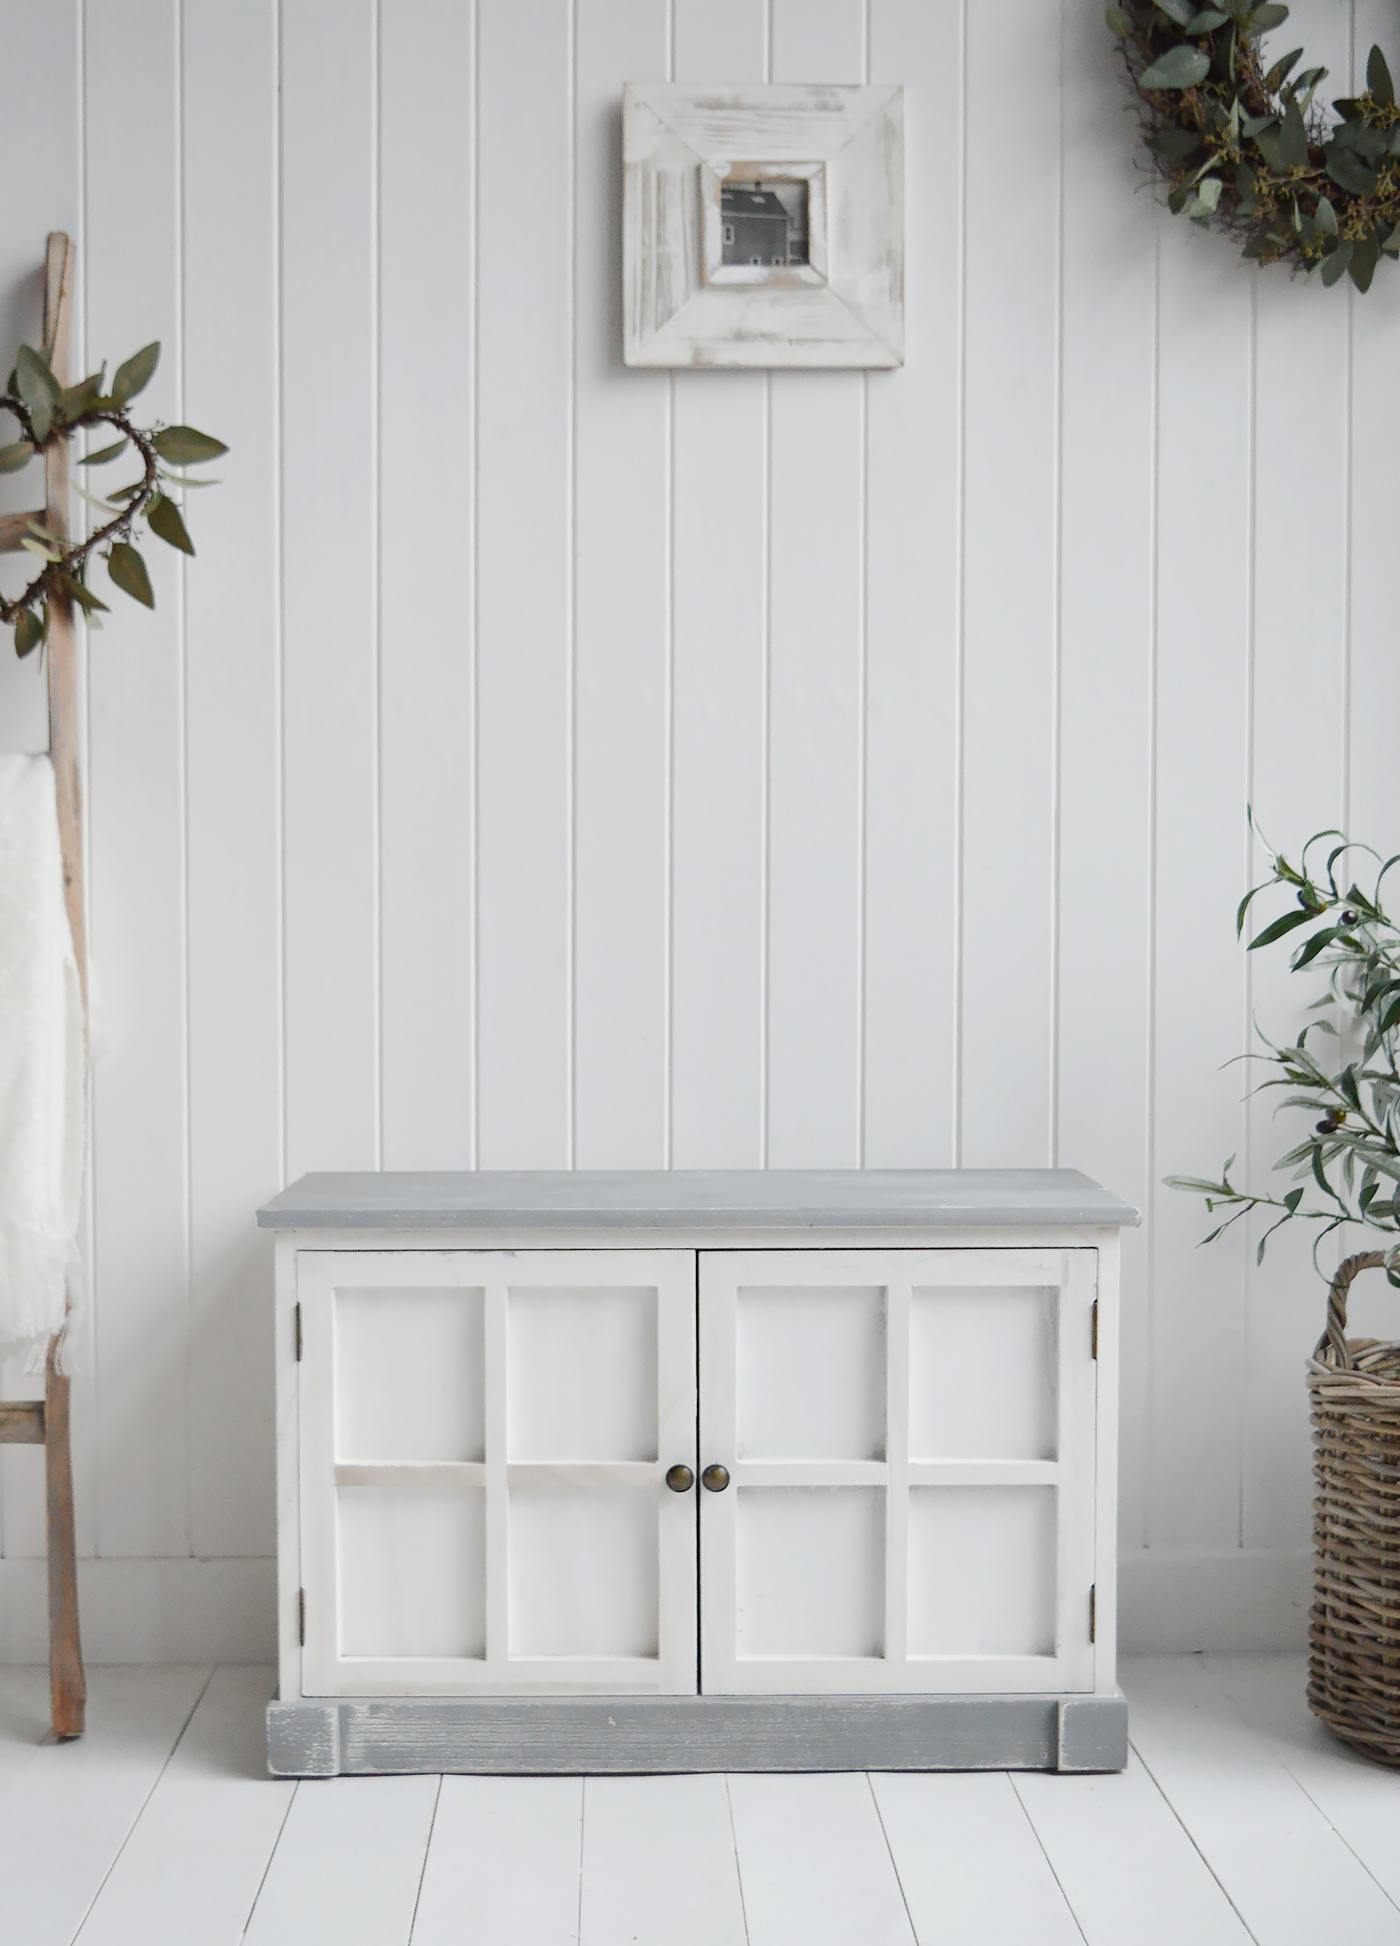 Charlotte White Wooden Storage Bench - New England Modern Farmhouse, Country and Coastal Hall Furniture